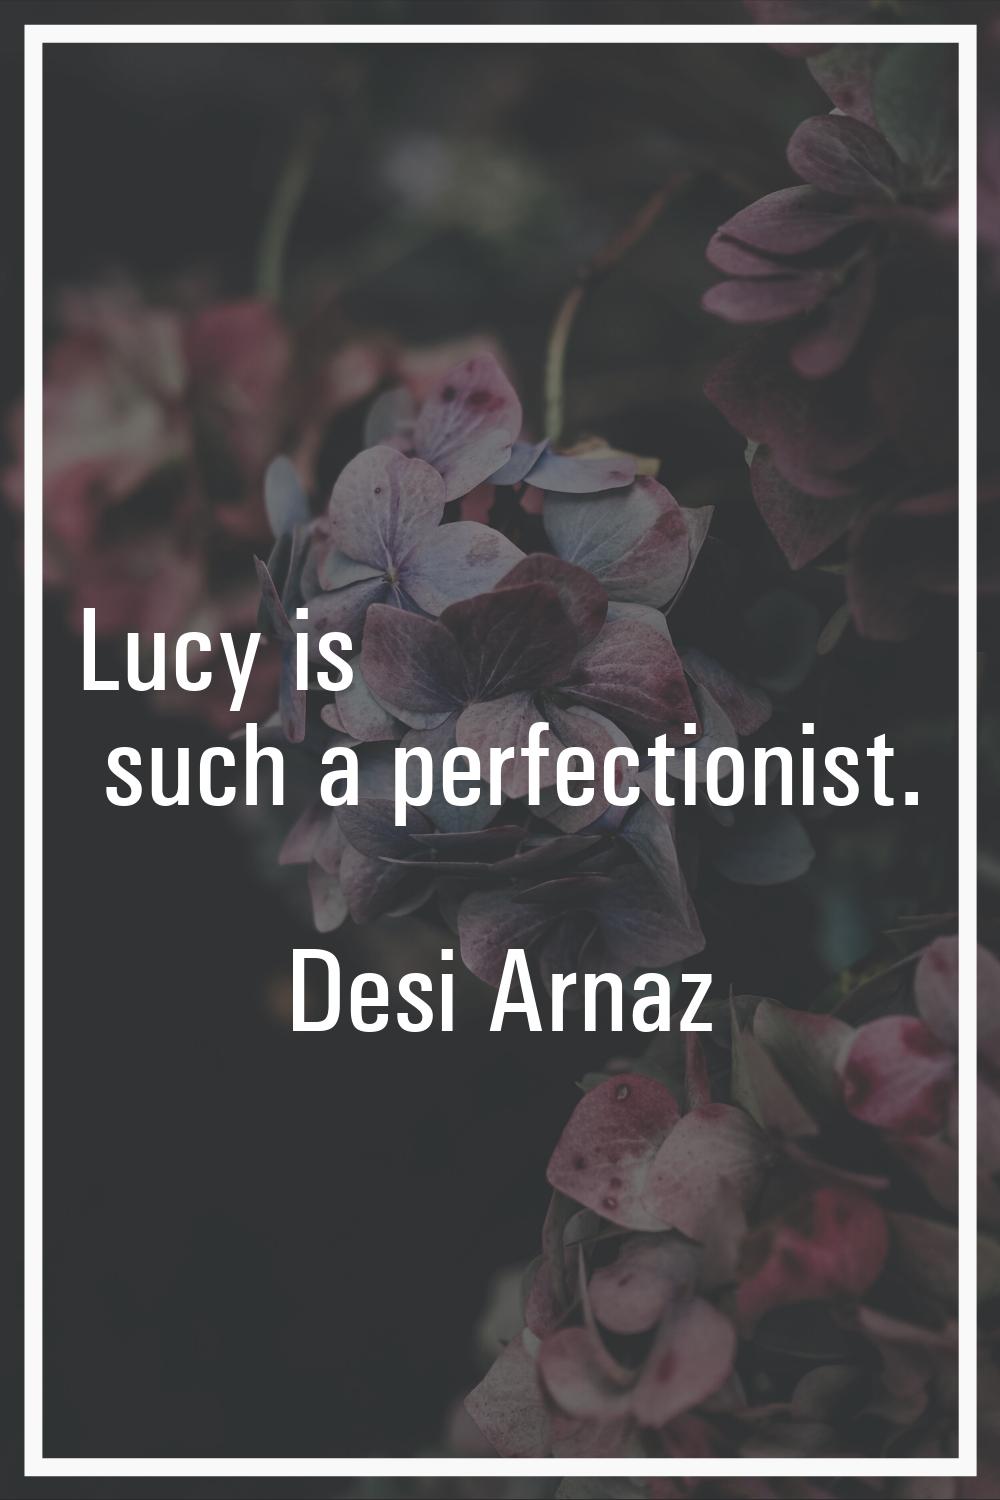 Lucy is such a perfectionist.